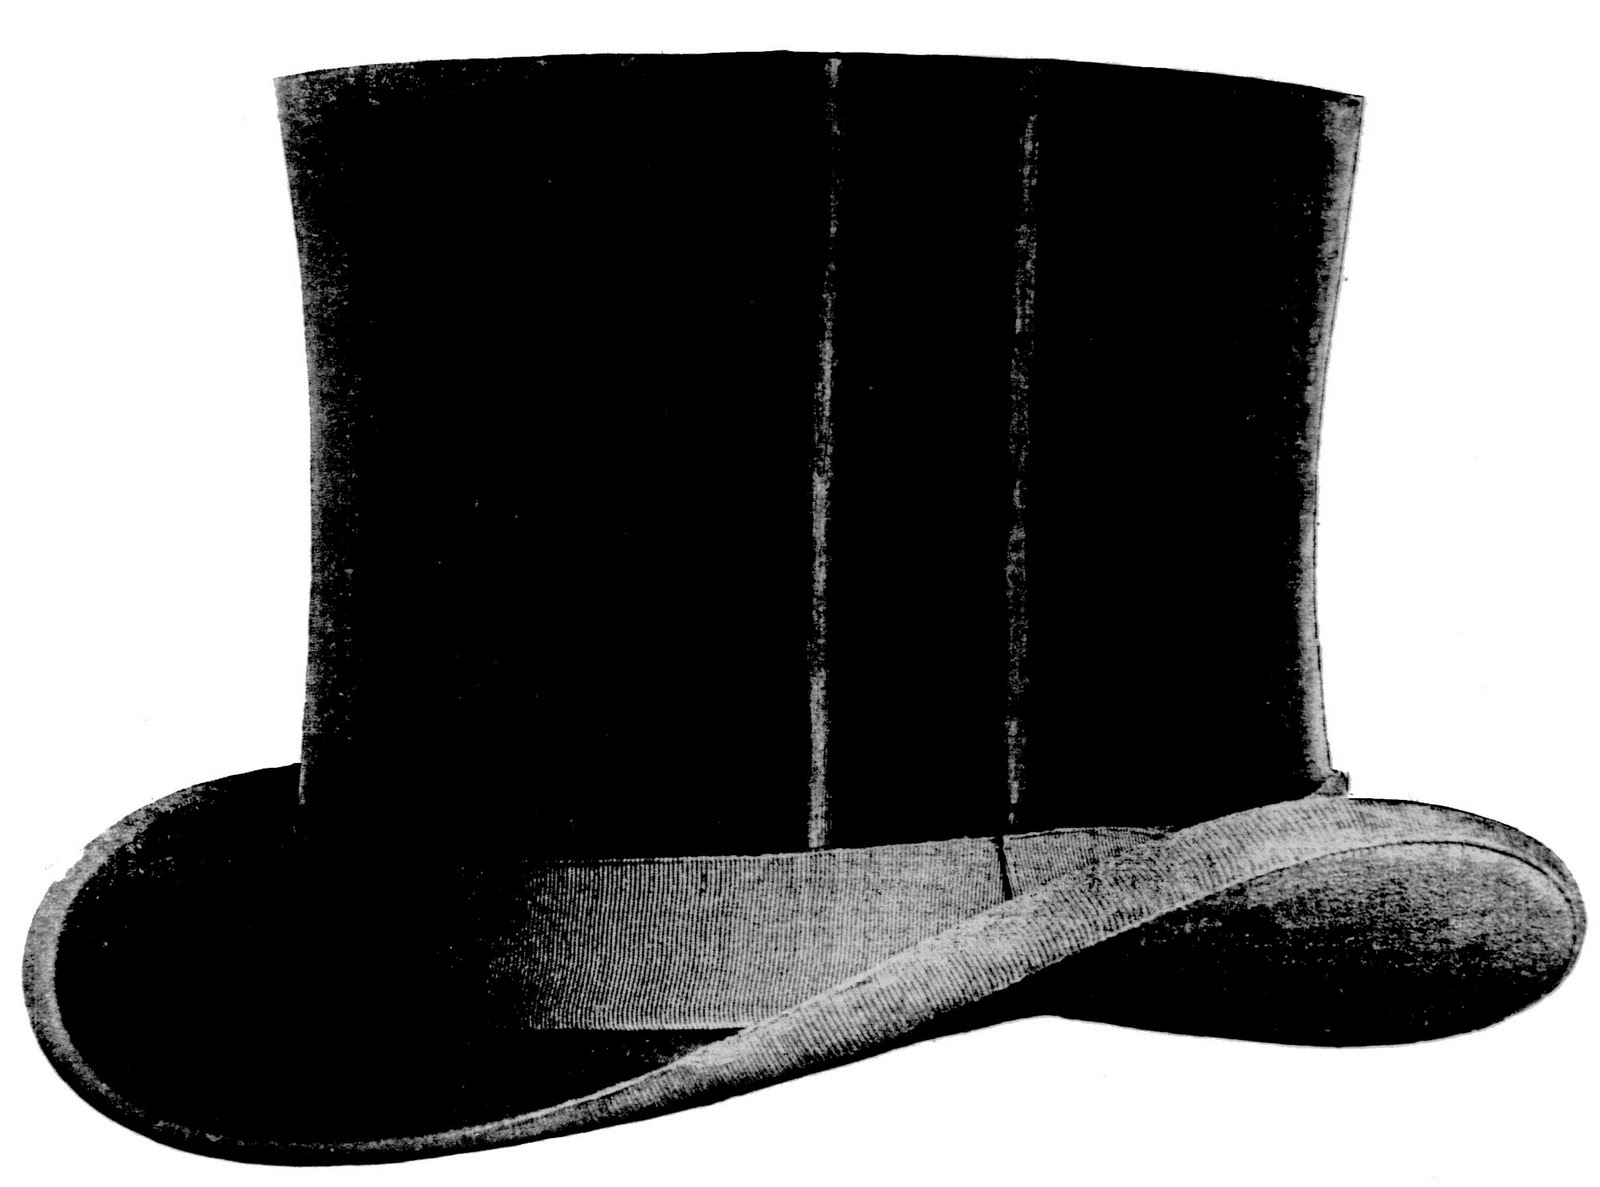 hat clipart black and white